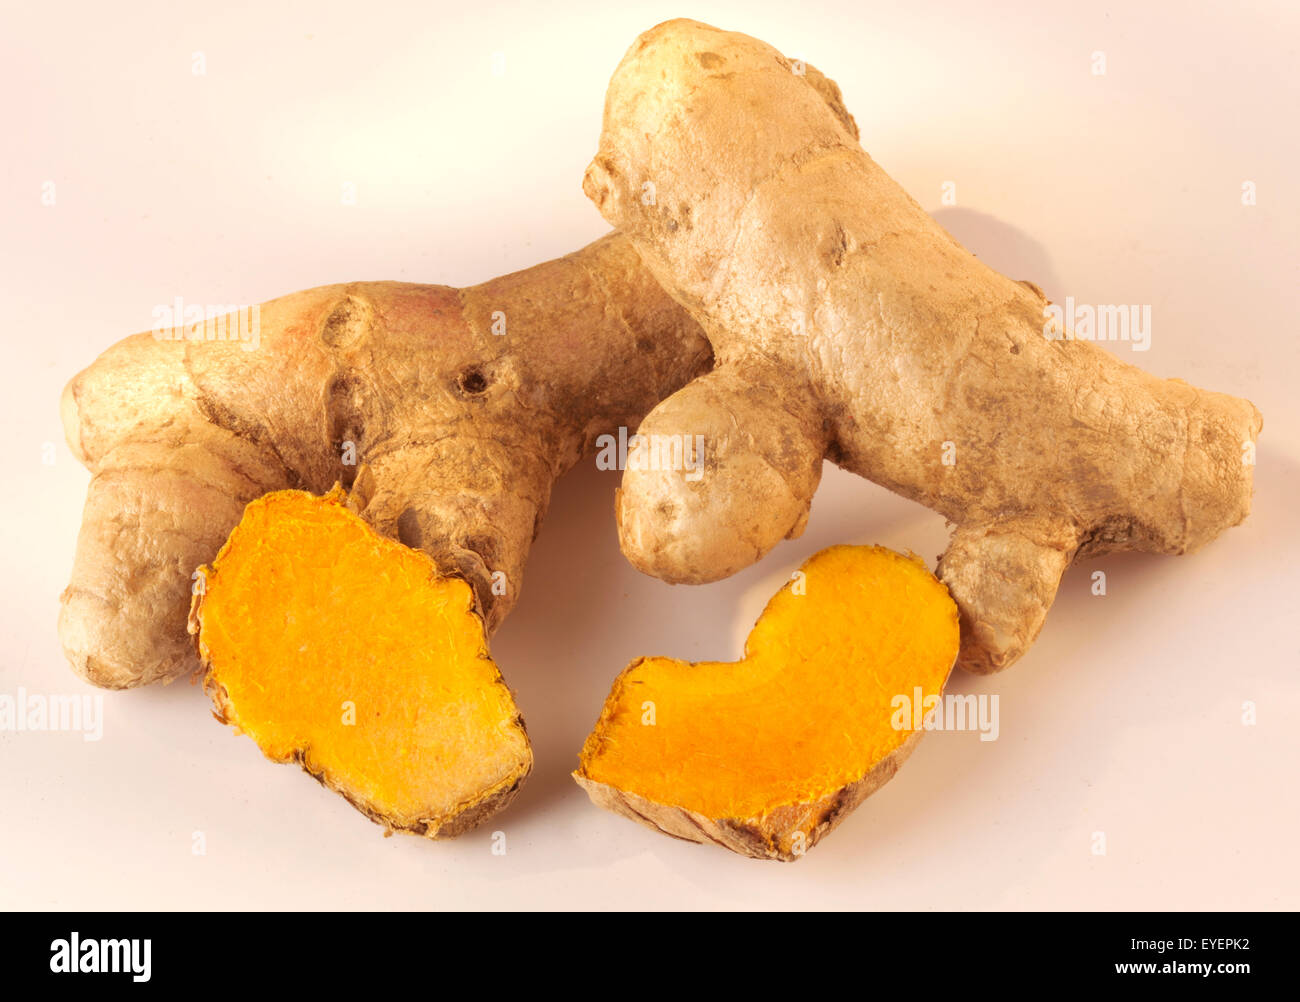 WHOLE TUMERIC ROOT AND SLICES Stock Photo